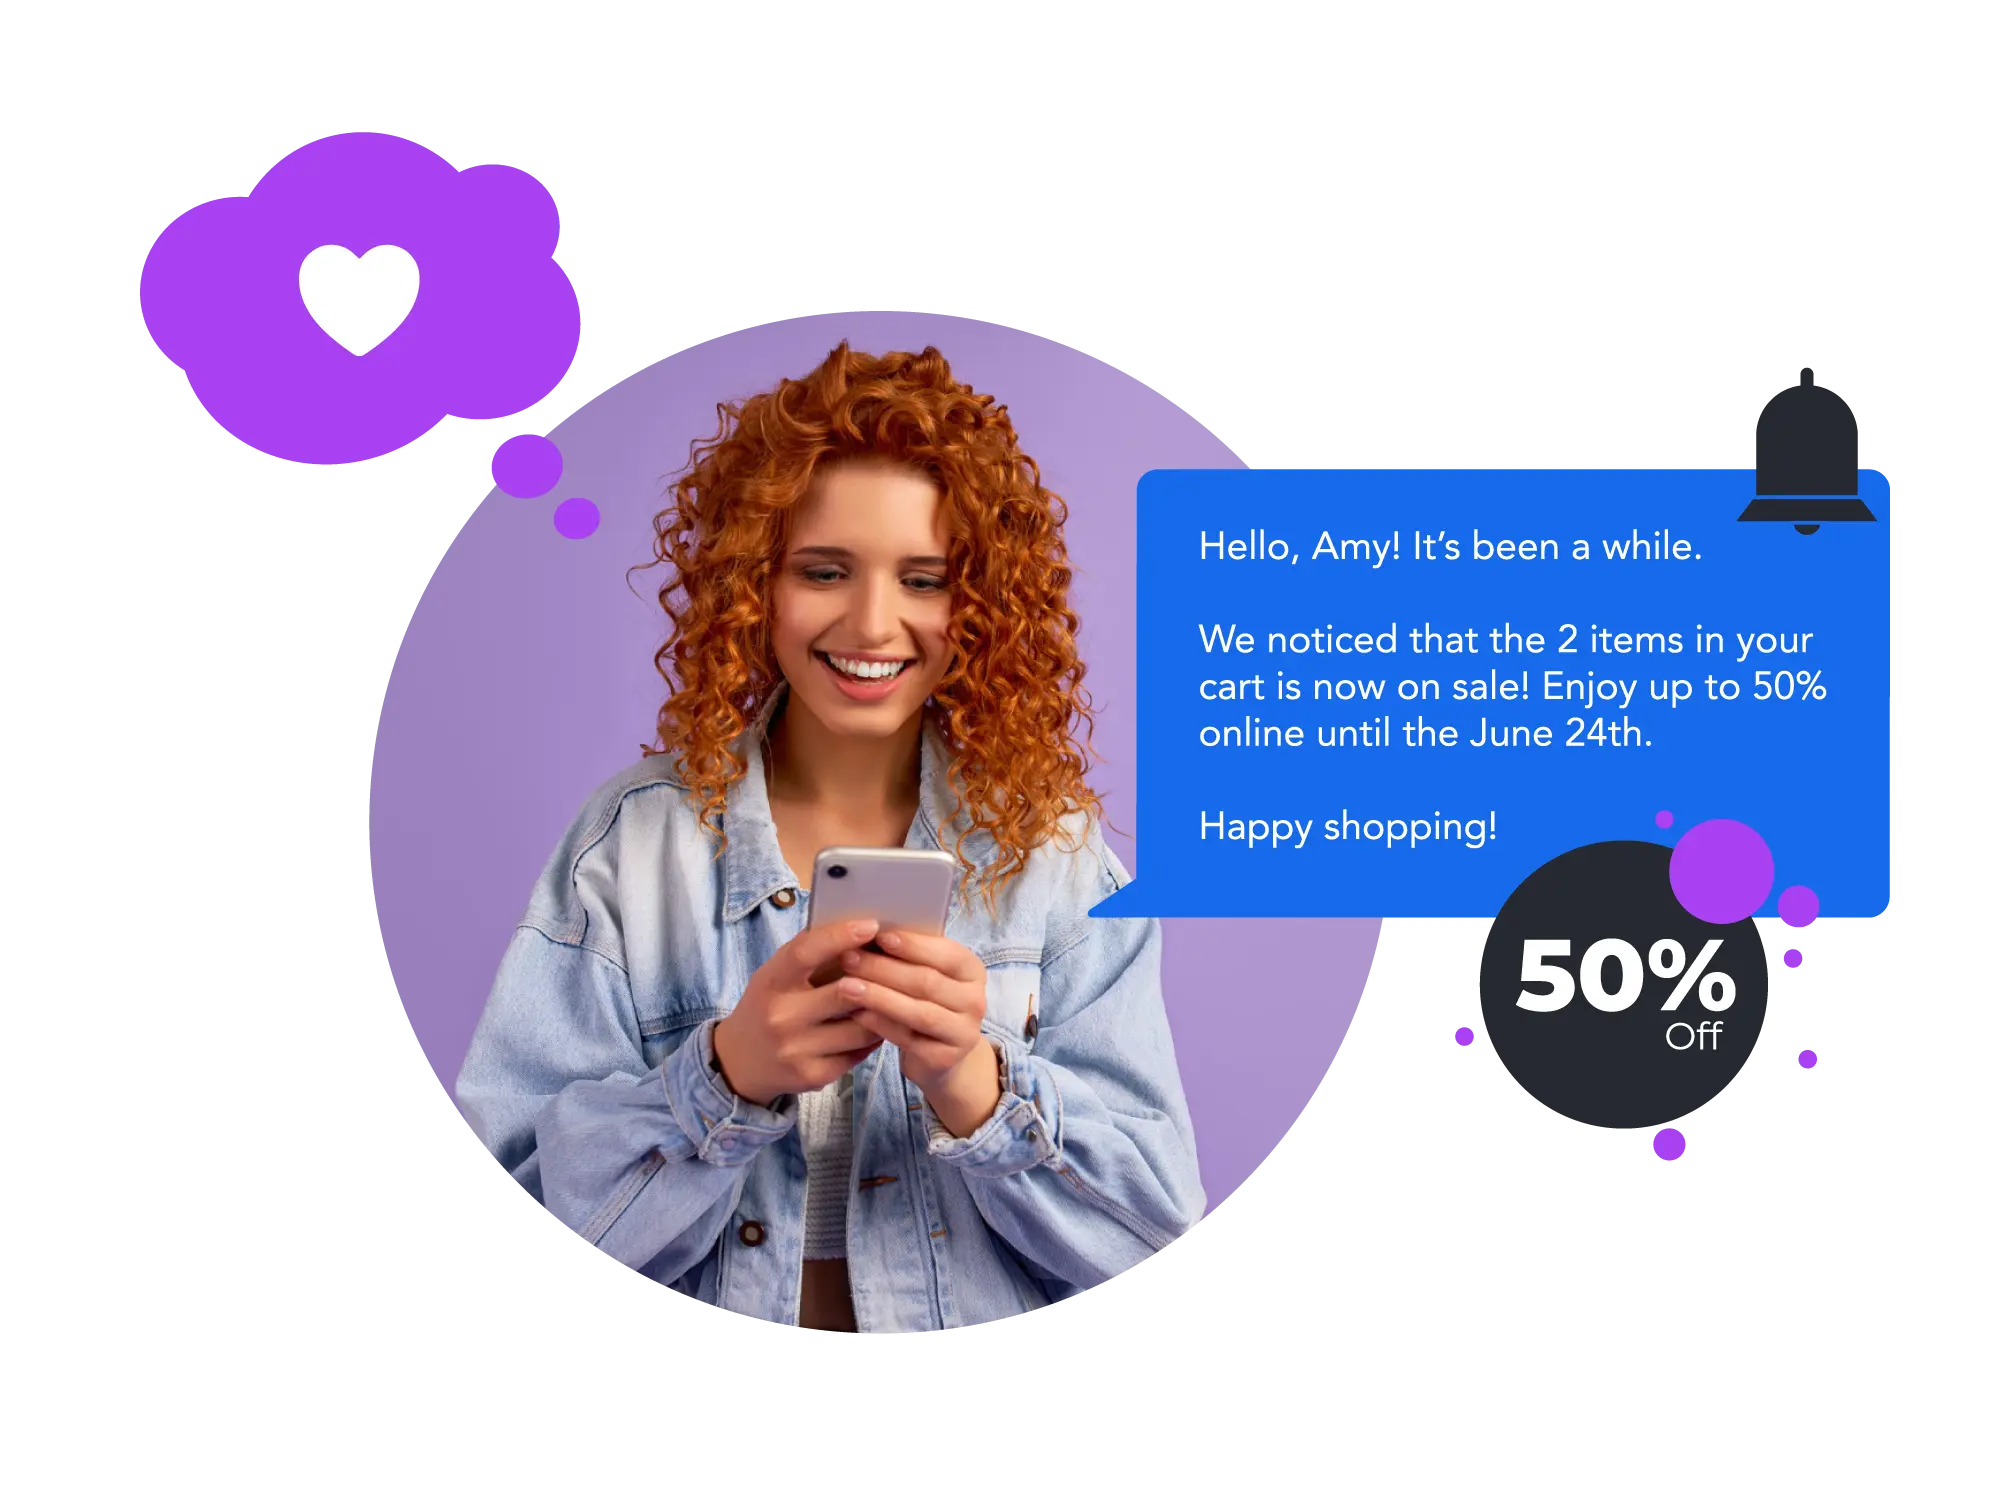 Sales - connecting customers to business by messaging